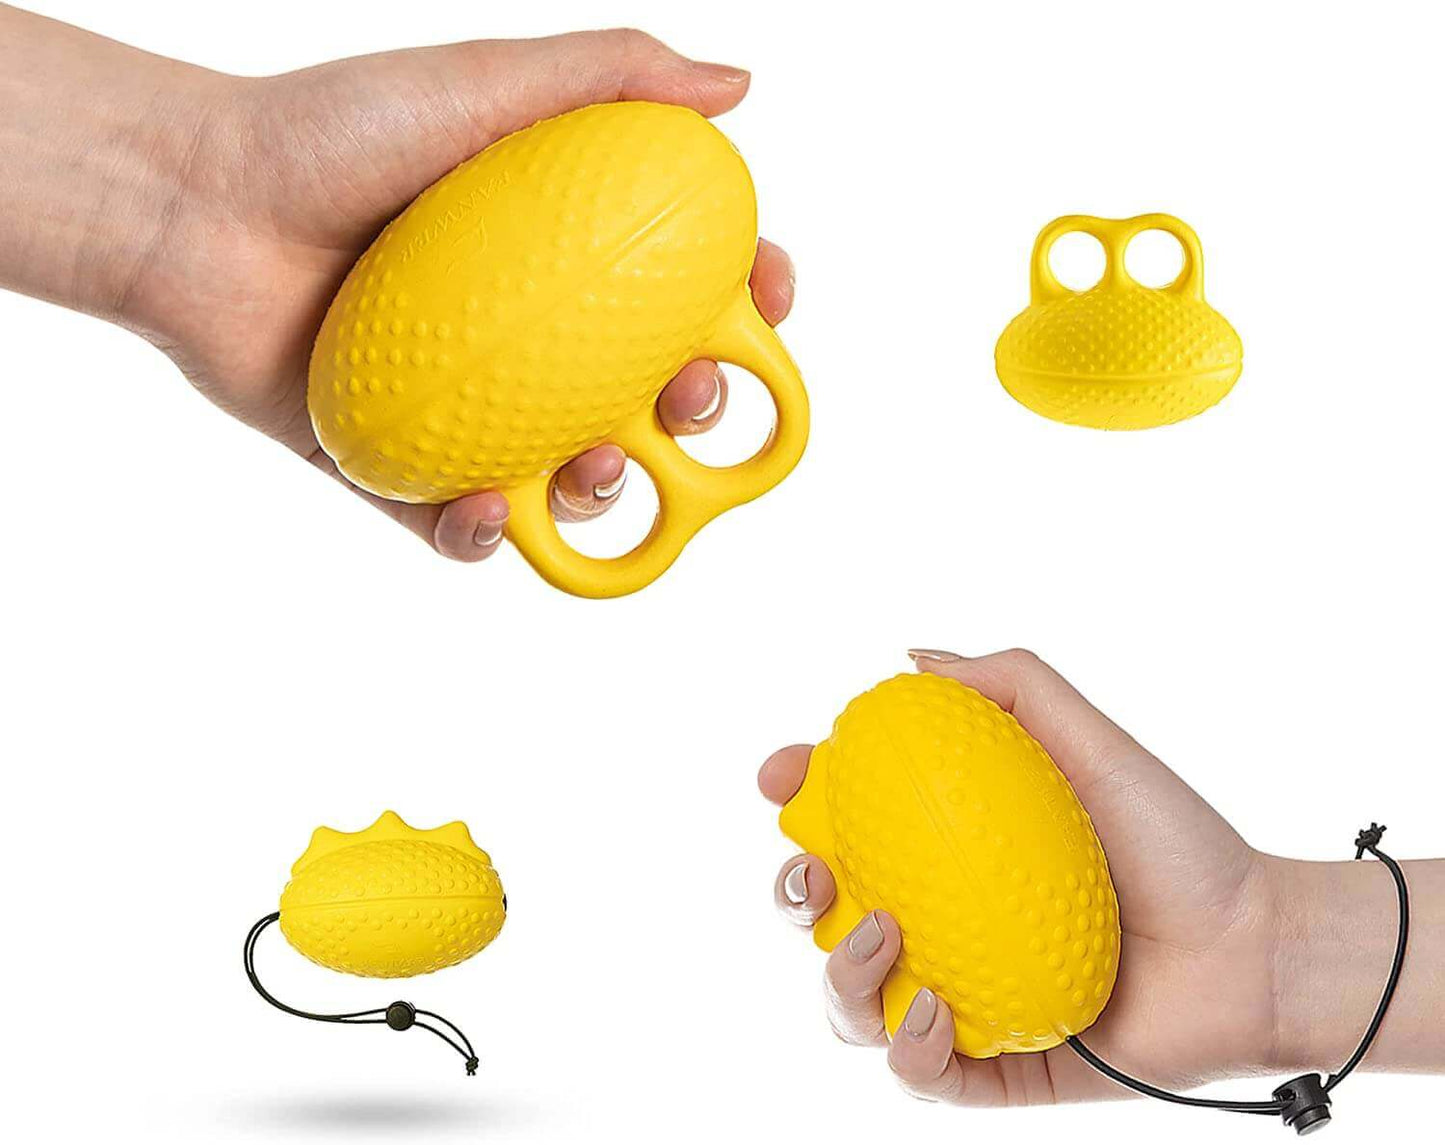 Finger exercise ball and stress ball on adjustable string set, feature image